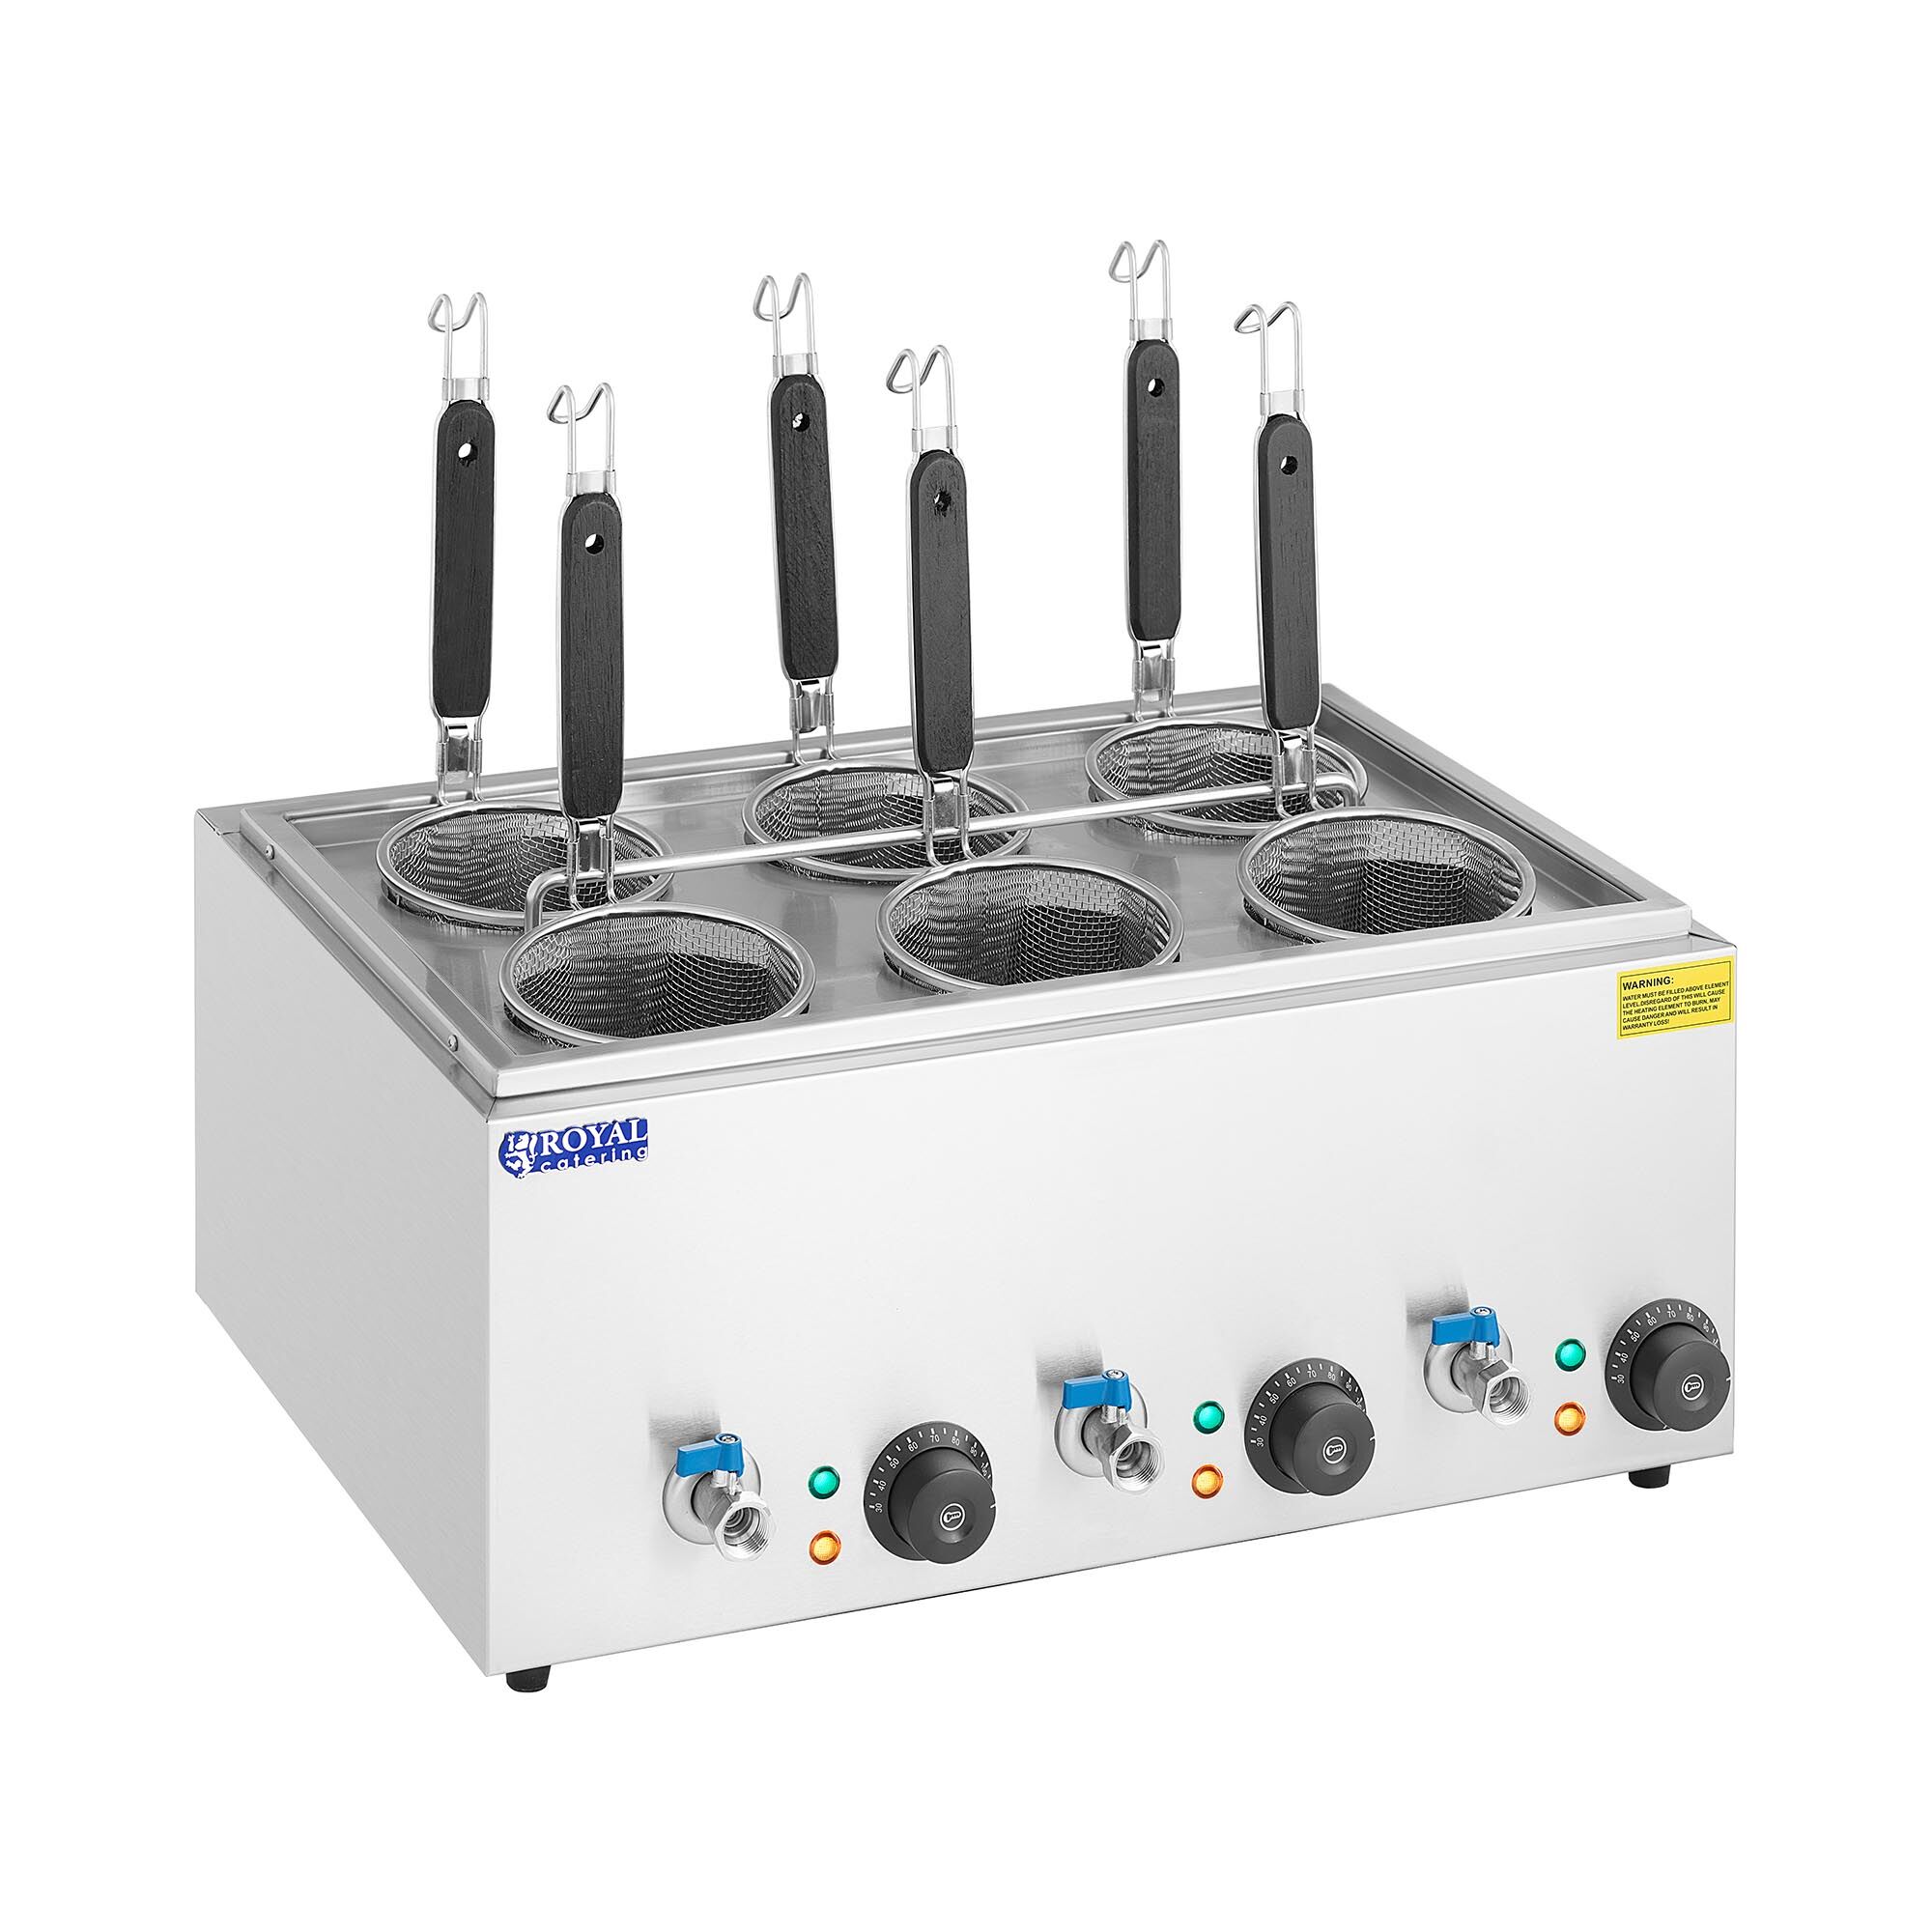 Royal Catering Pasta Cooker with 6 baskets - temperature: 30 - 110 °C